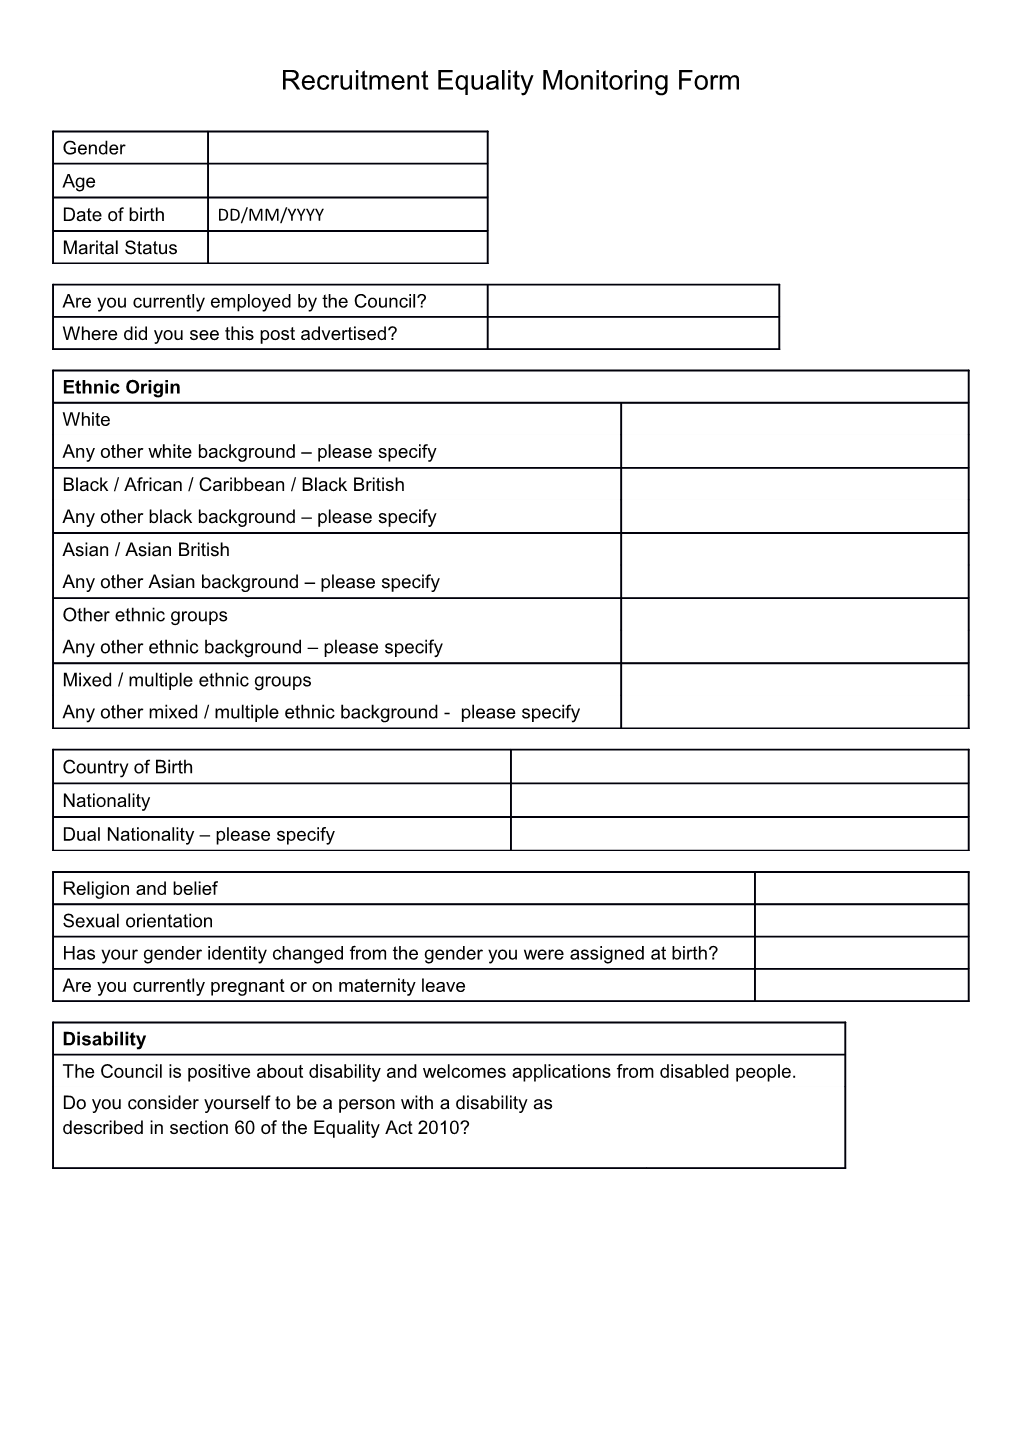 Recruitment Equality Monitoring Form